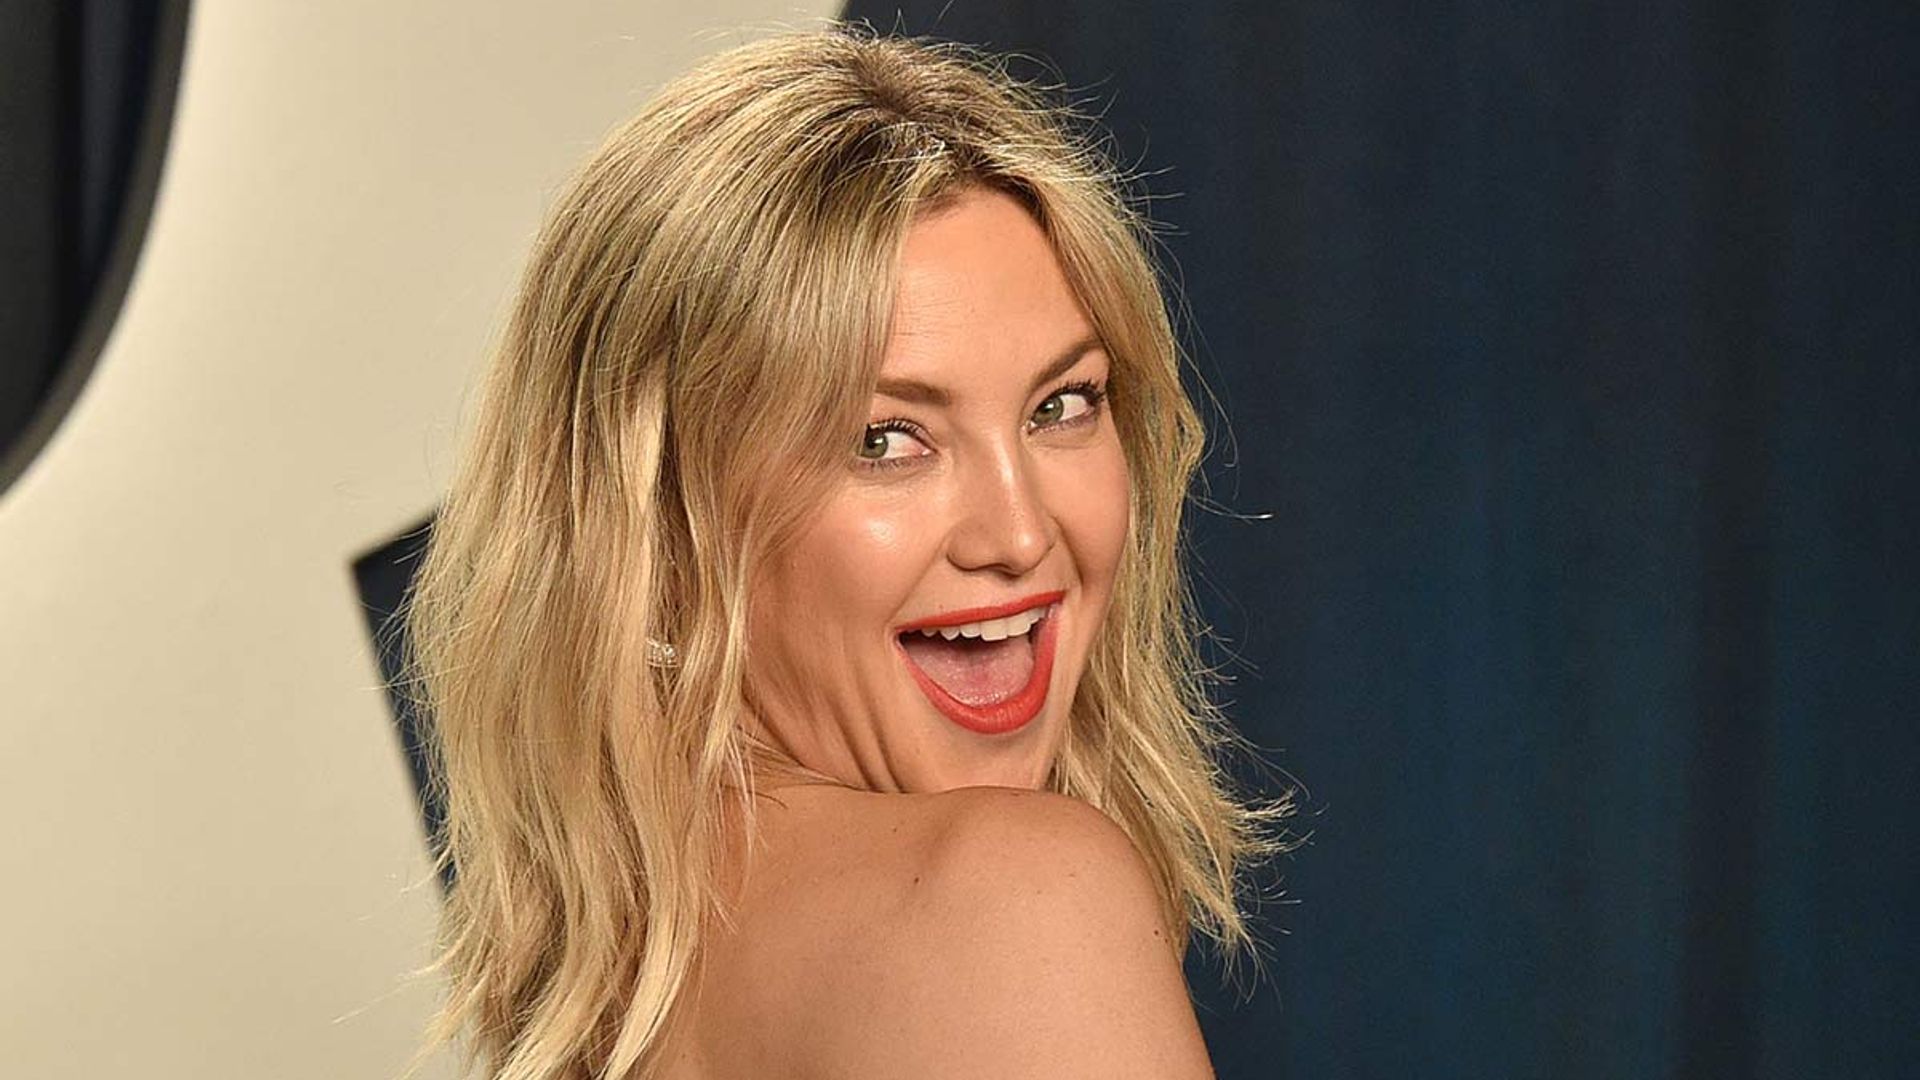 This Is the Sports Bra Kate Hudson Would Wear on a Date